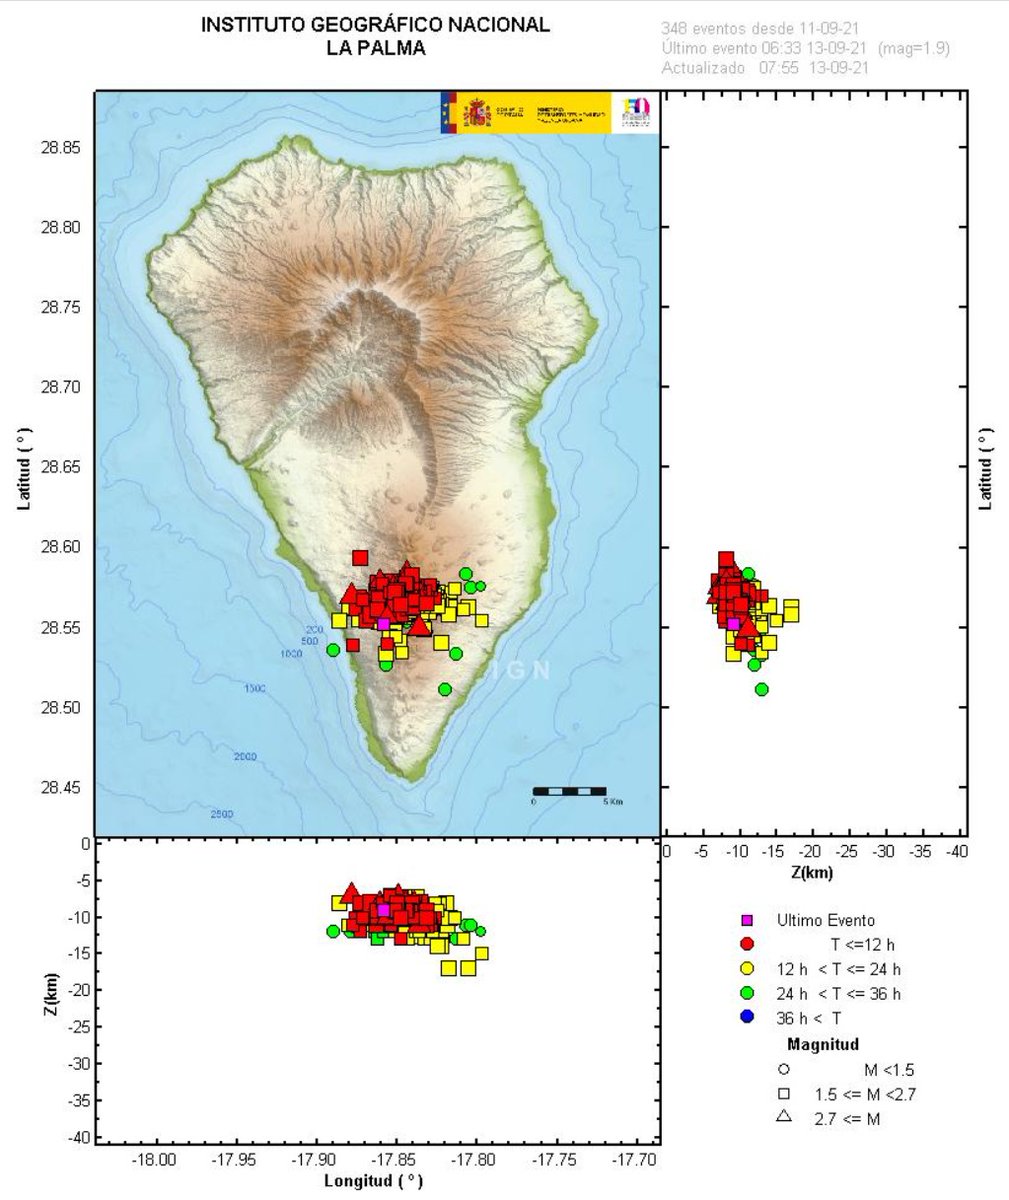 A map of La Palma showing the time, magnitude and location of the earthquakes. They are located in the south of the island and at depths of around 10km